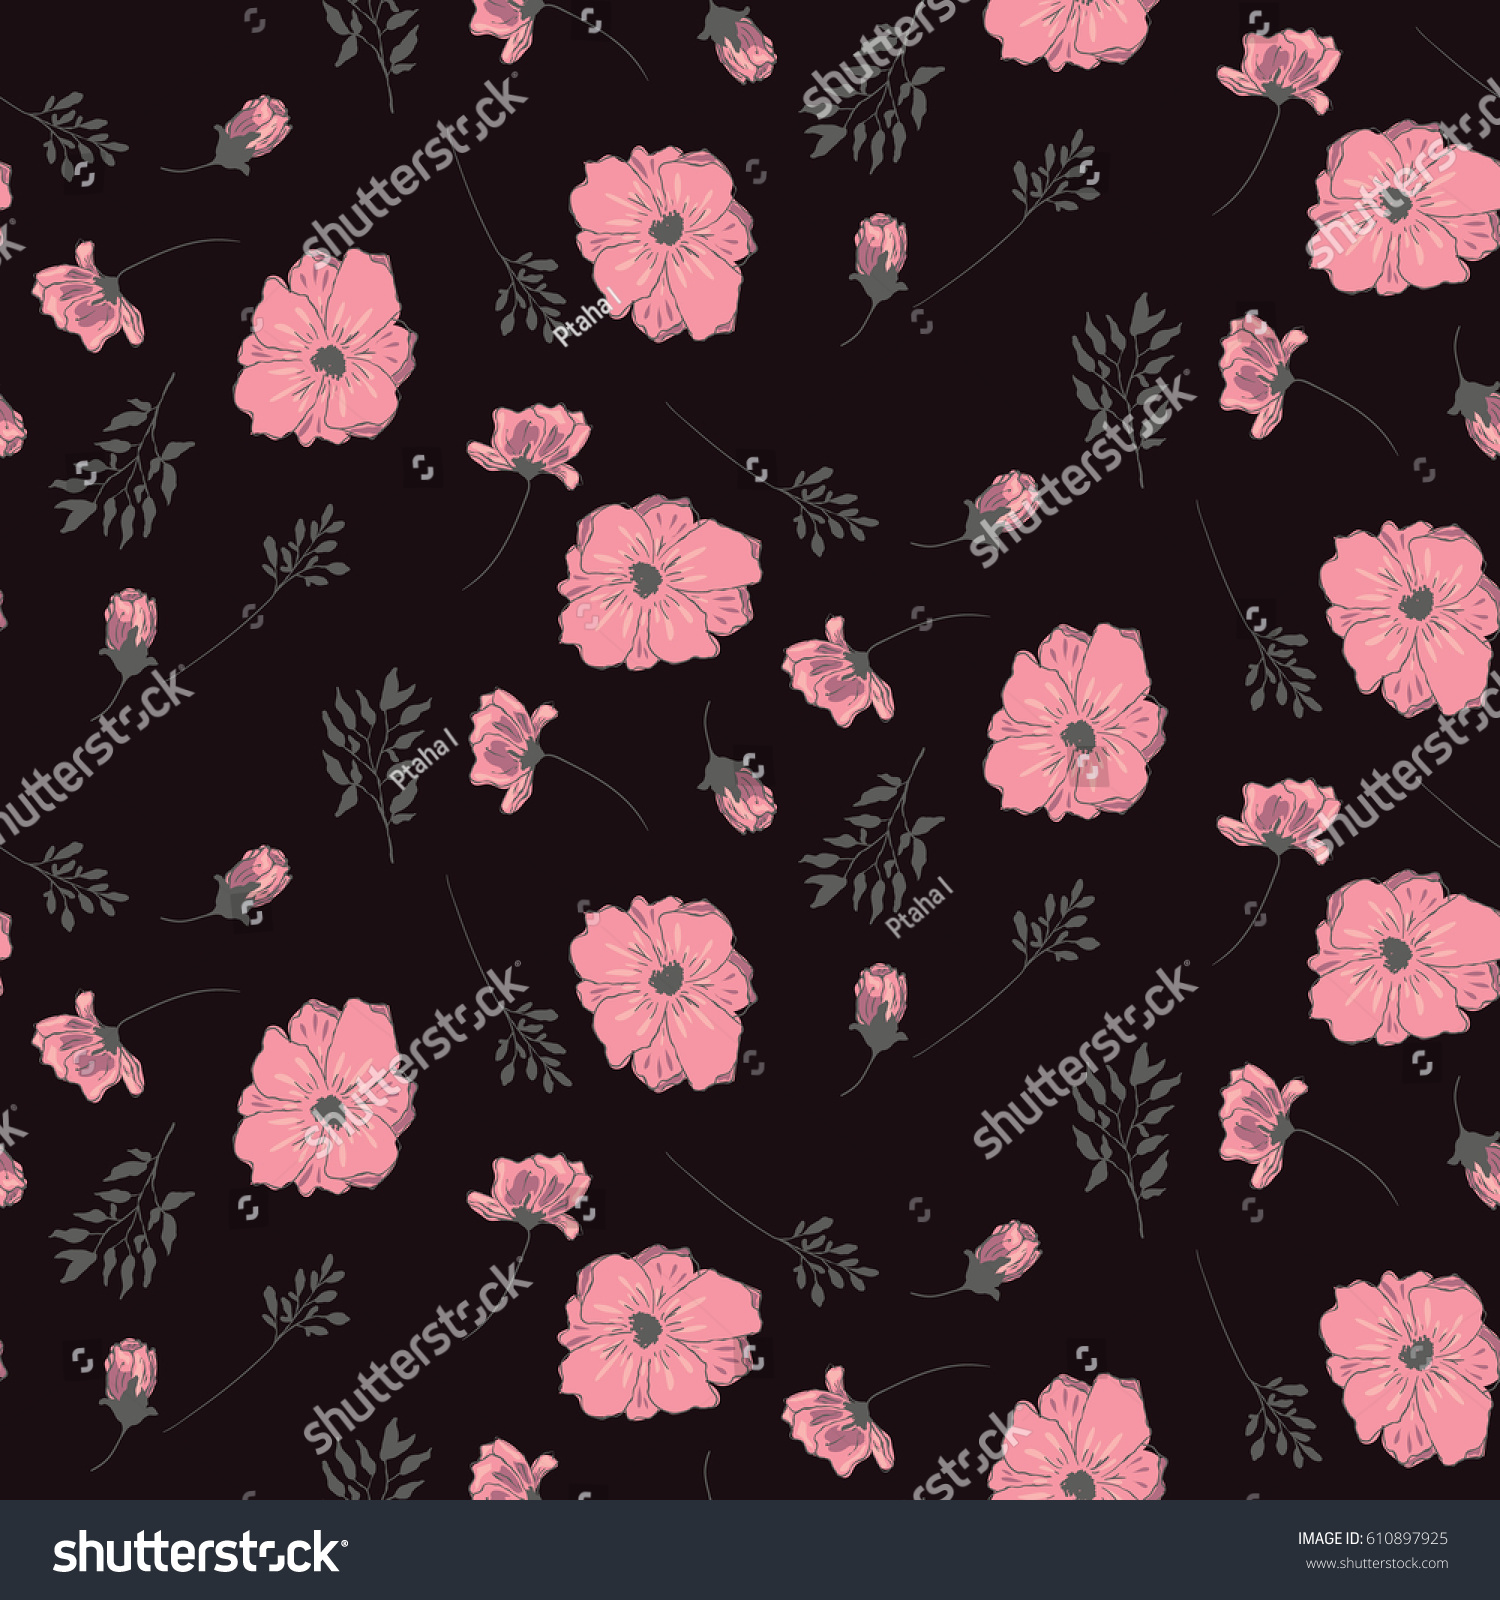 Pink flowers on black background floral stock vector royalty free